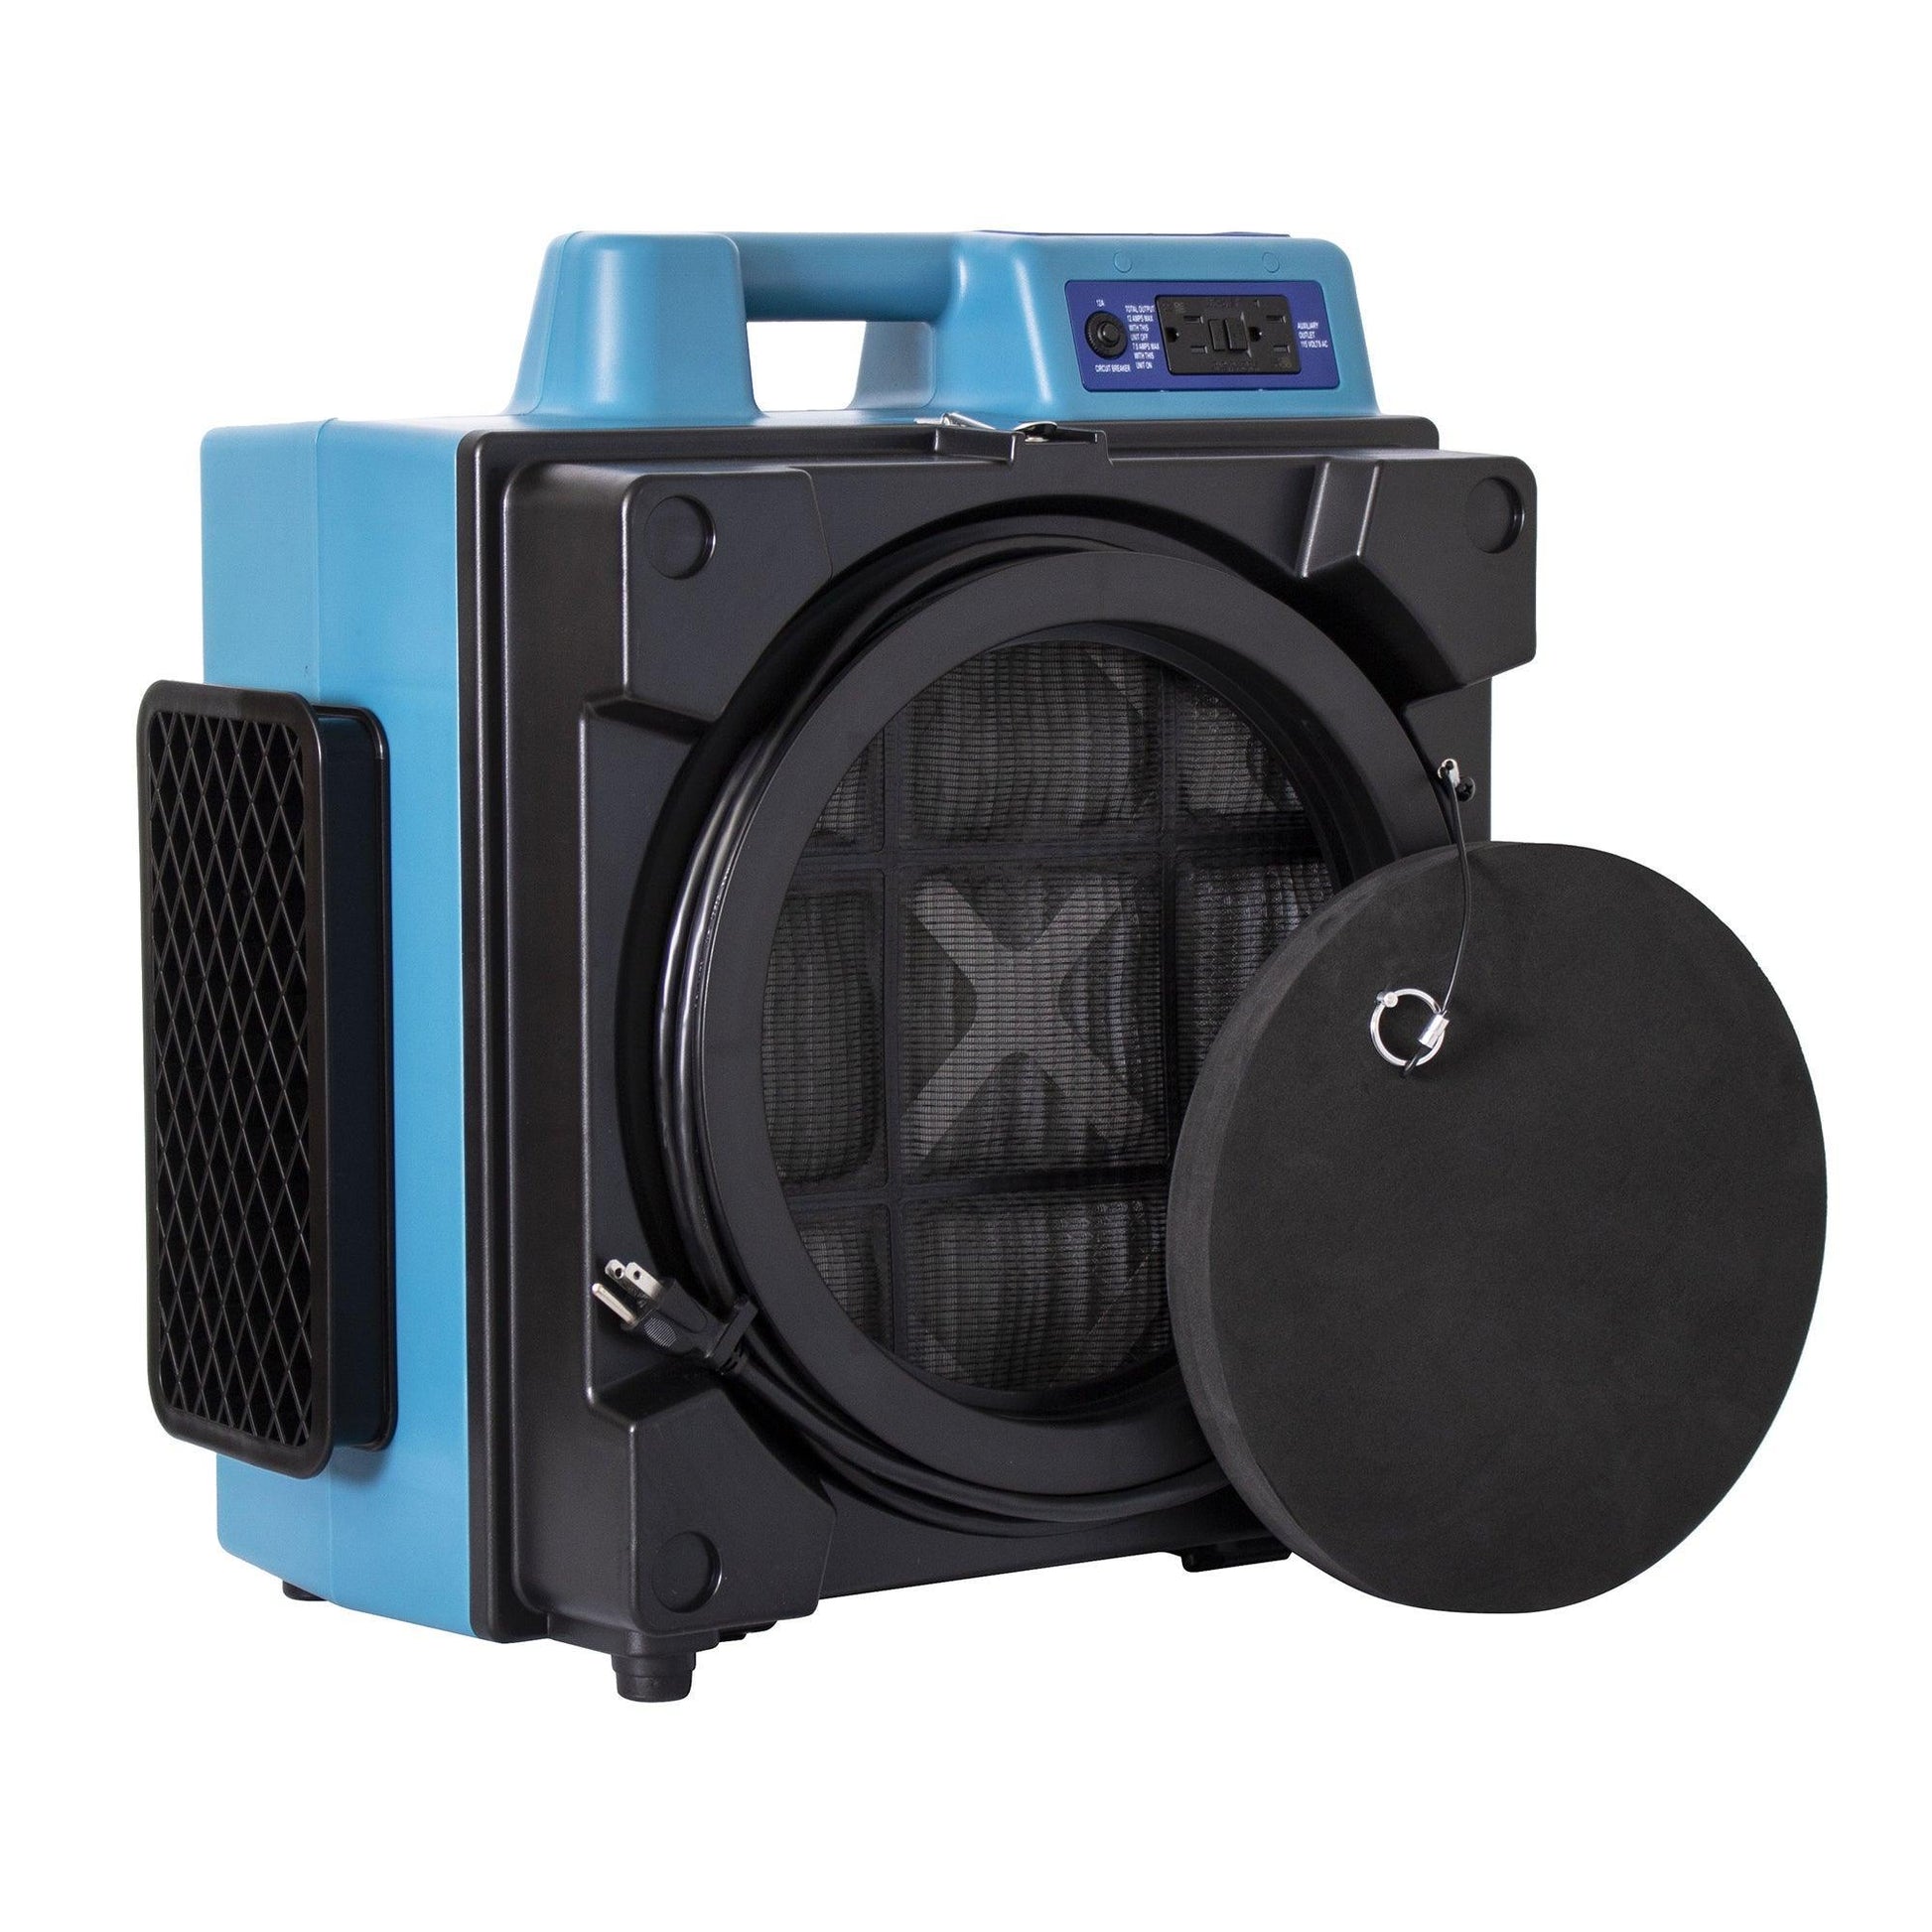 XPOWER X-4700AM Professional 3 Stage Filtration HEPA Purifier System, Negative Air Machine, airborne Air Cleaner, Air Scrubber with Built-in GFCI Power Outlets and Hour Meter - Elite Air Purifiers